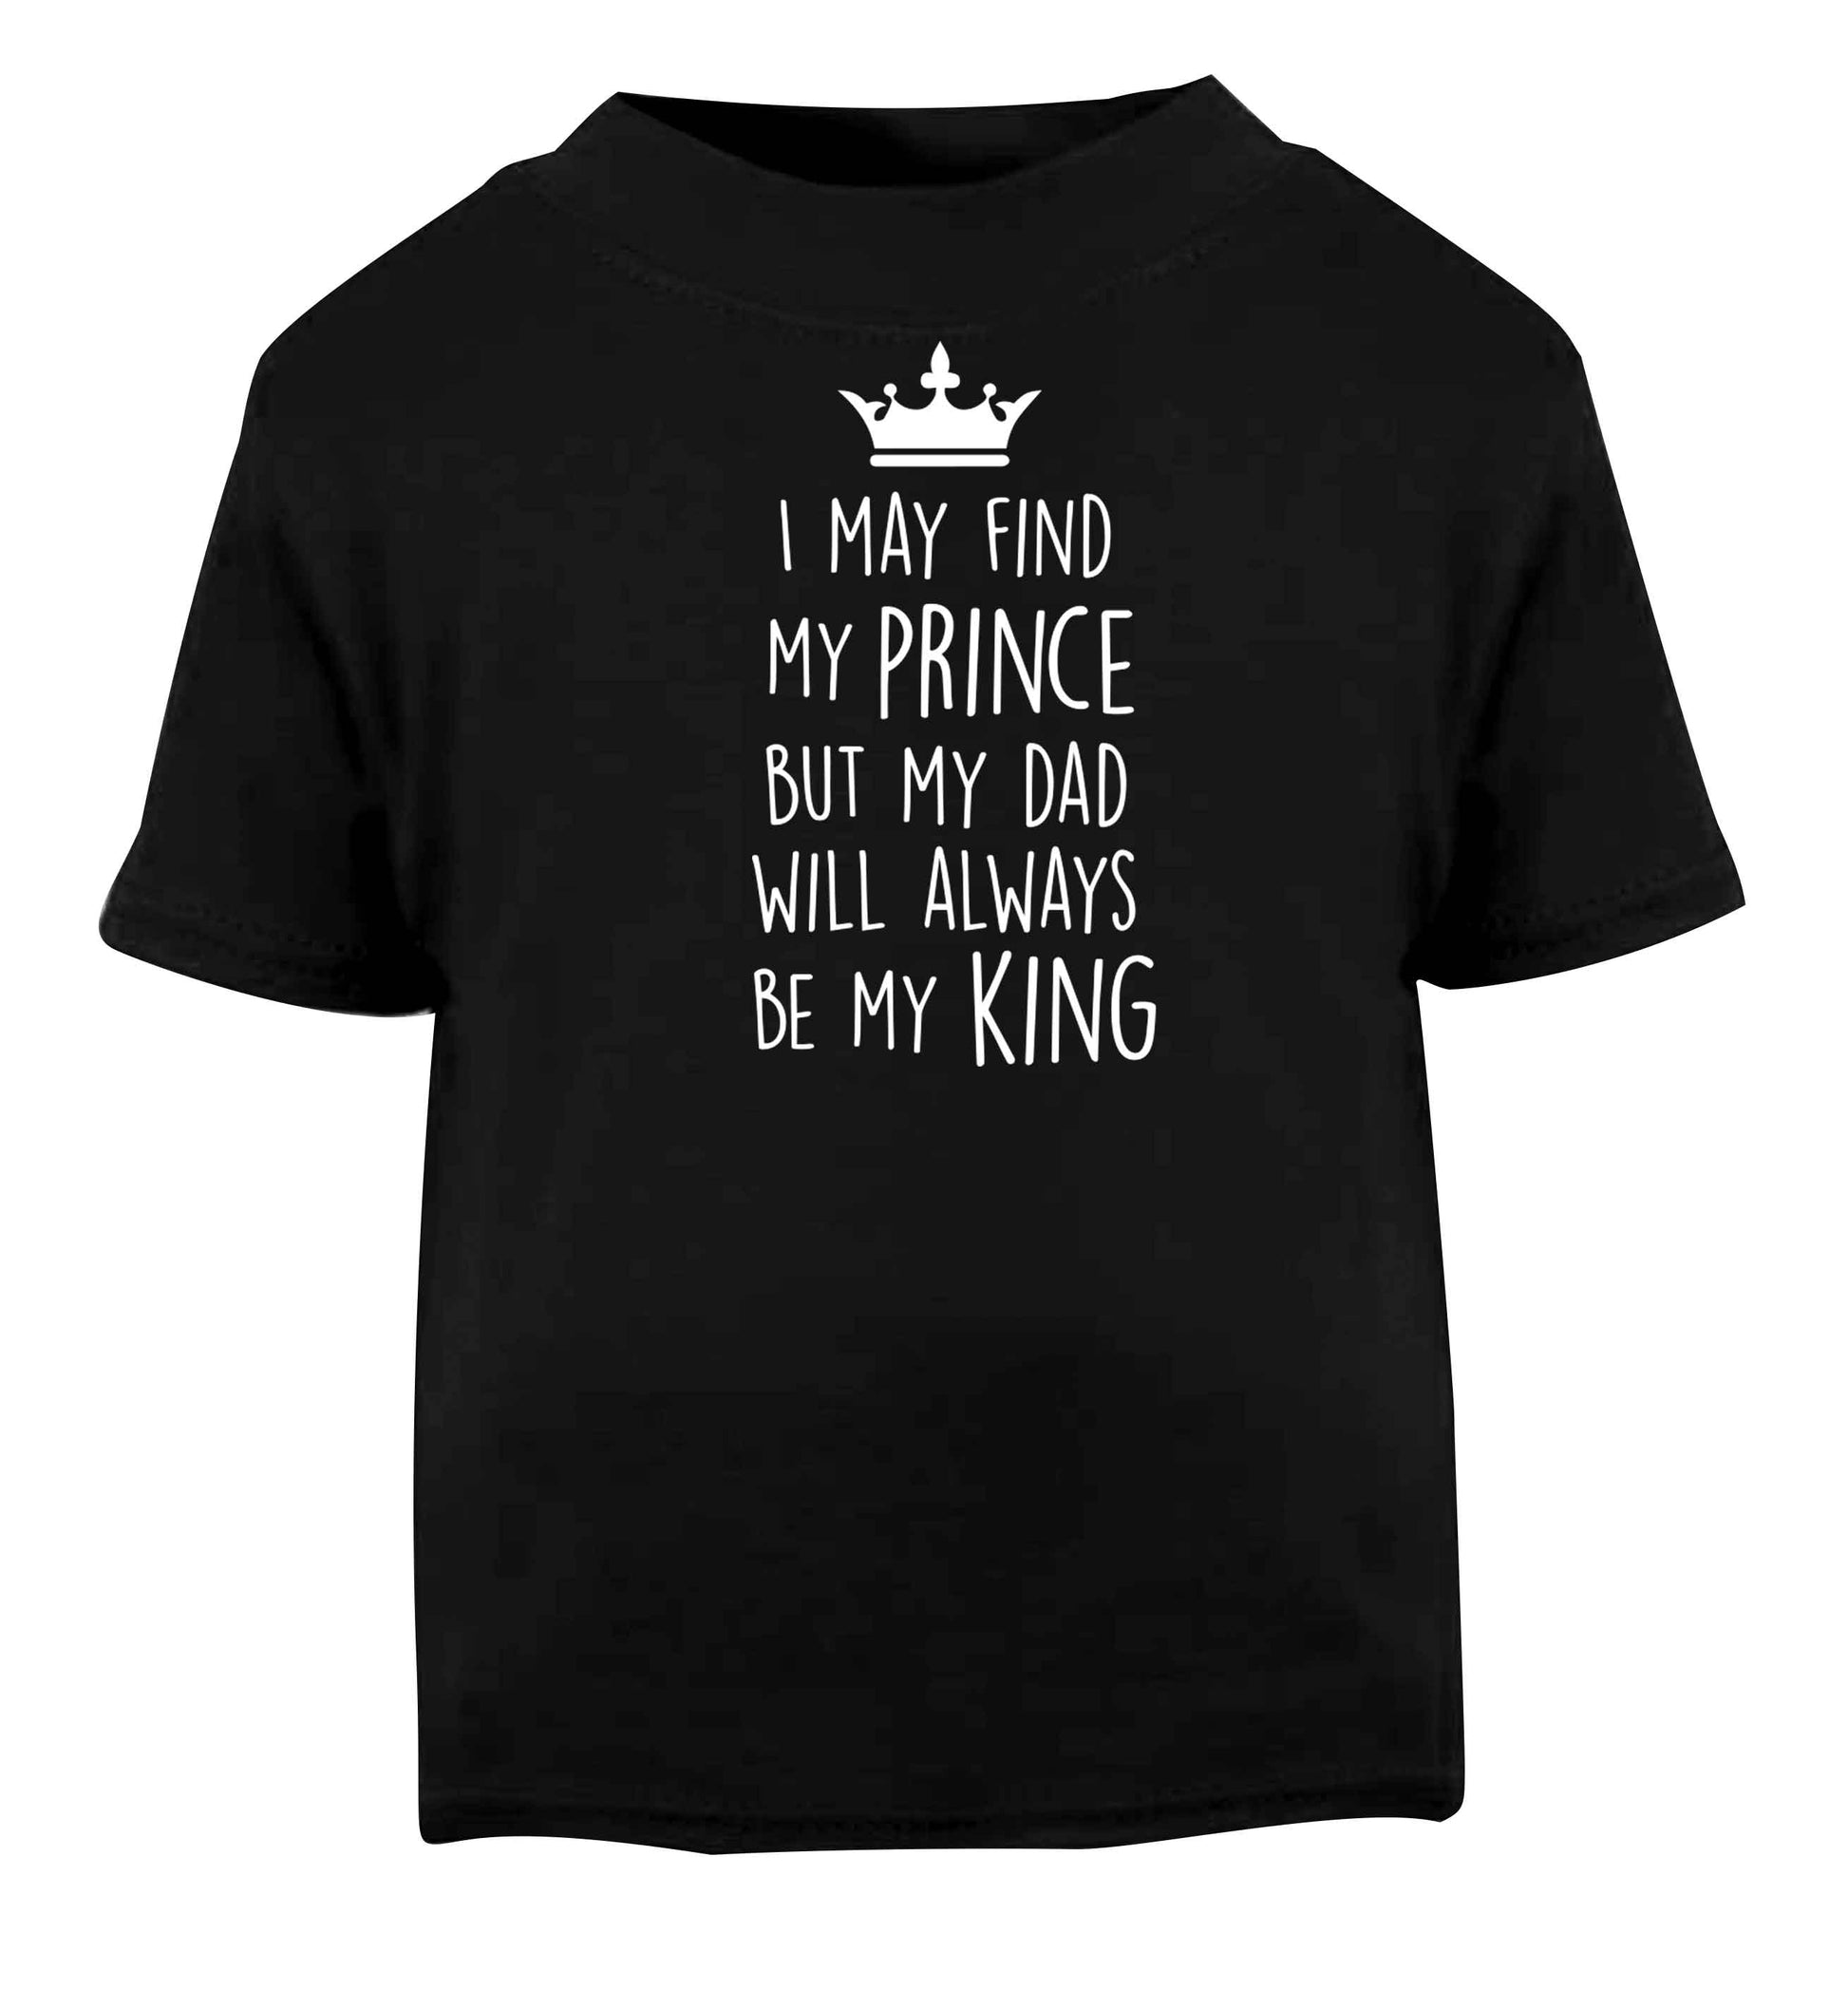 I may find my prince but my dad will always be my king Black baby toddler Tshirt 2 years